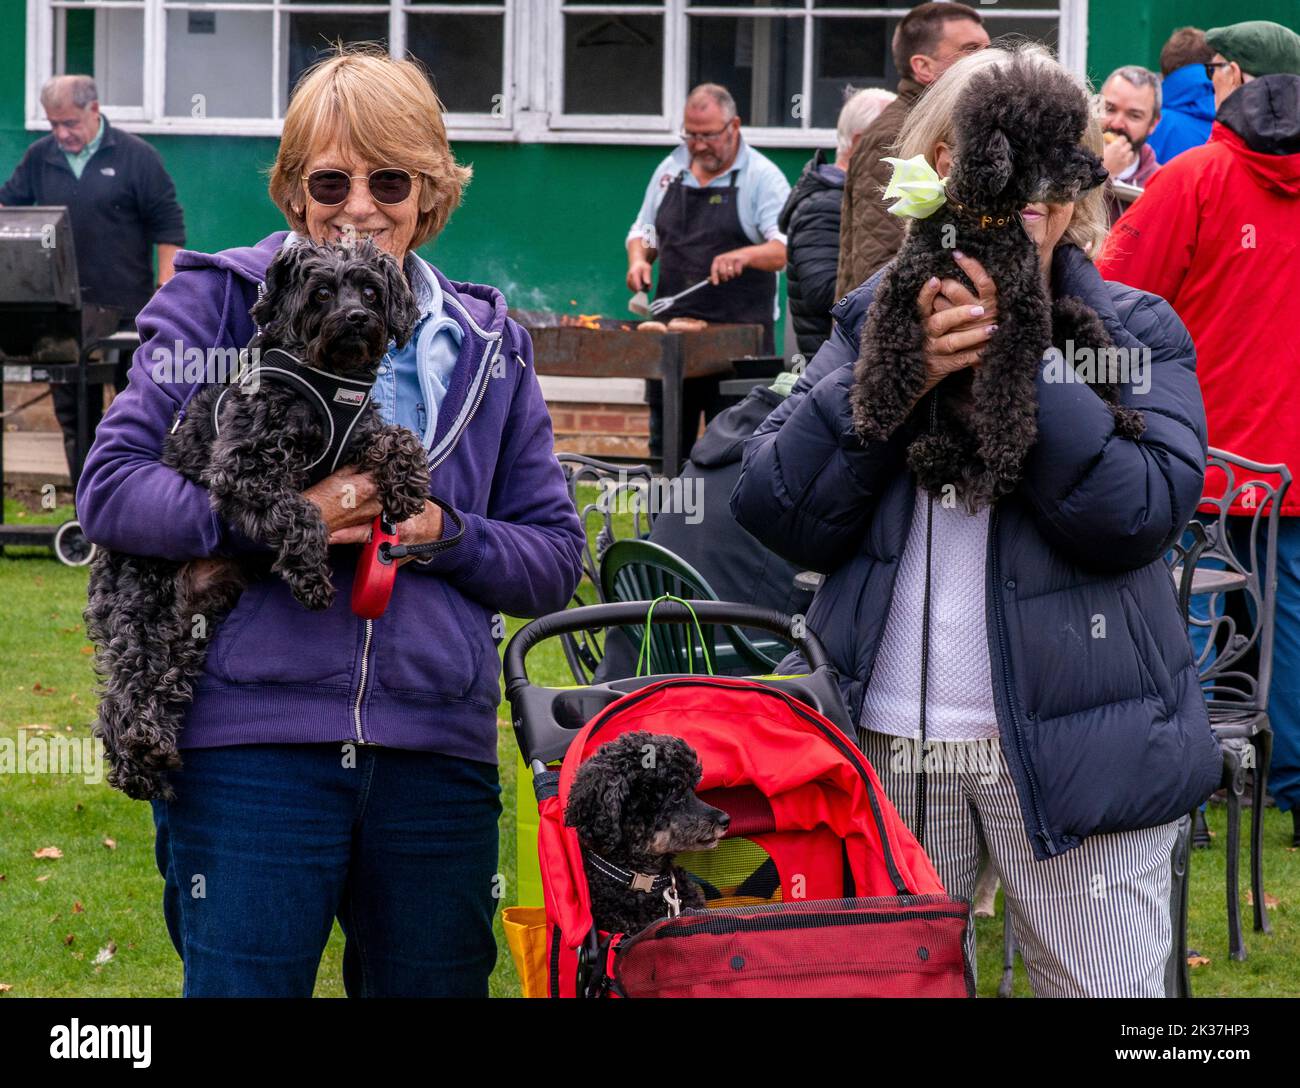 Follifoot, near Harrogate, North Yorkshire, 25th September 2022. The Follifoot Dog Festival where dog lovers were able to show off their beloved pets today. Marienne and her friend with their dogs Dolly, Teddy and Jack. Picture Credit: ernesto rogata/Alamy Live News Stock Photo